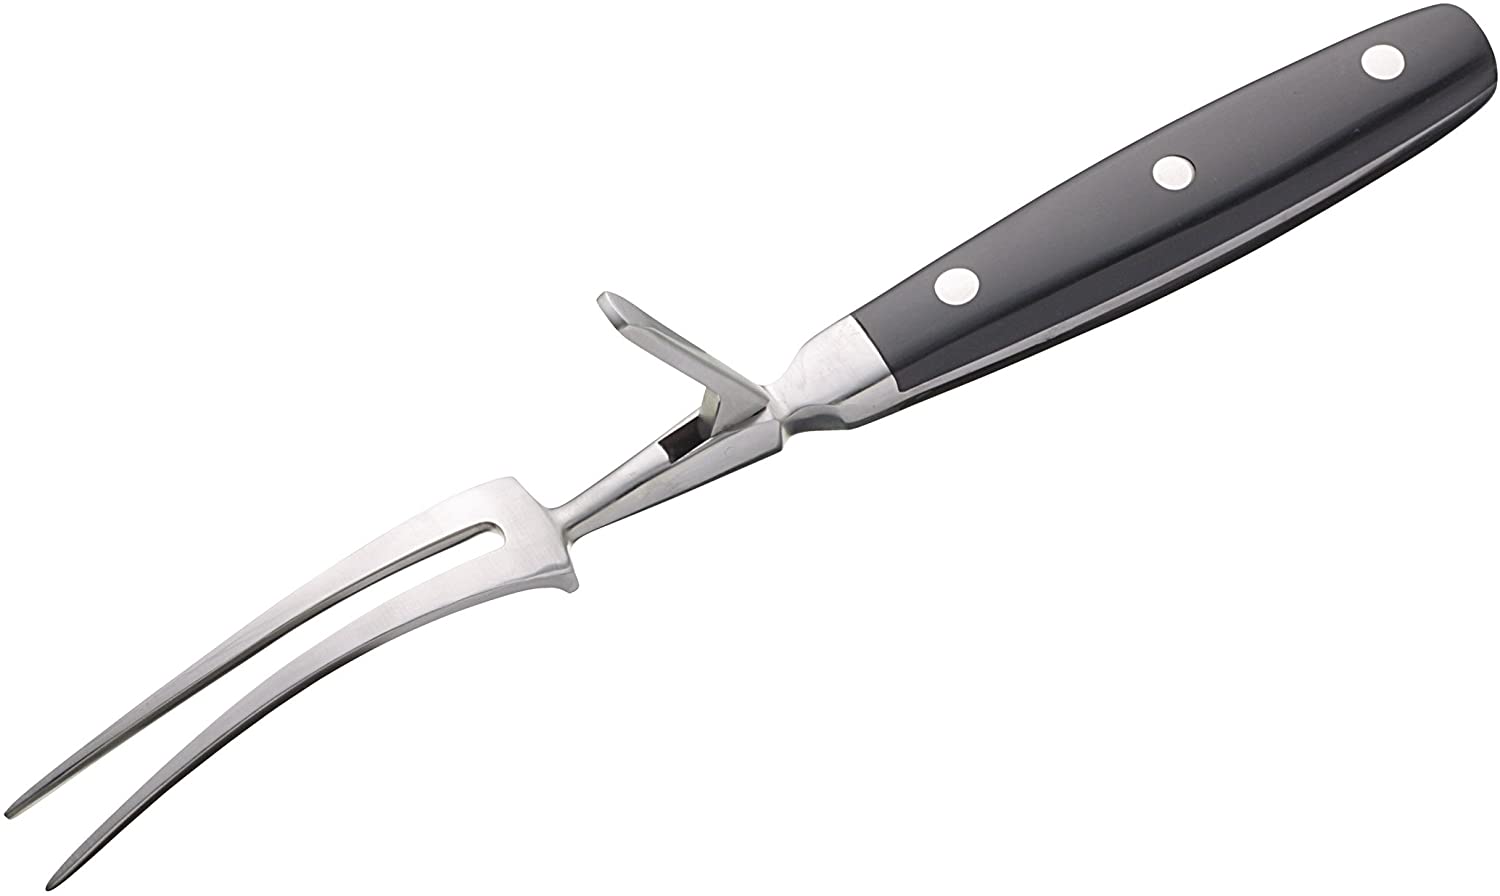 KitchenCraft Master Class Deluxe Traditional Carving Fork with Retractable Safety Guard